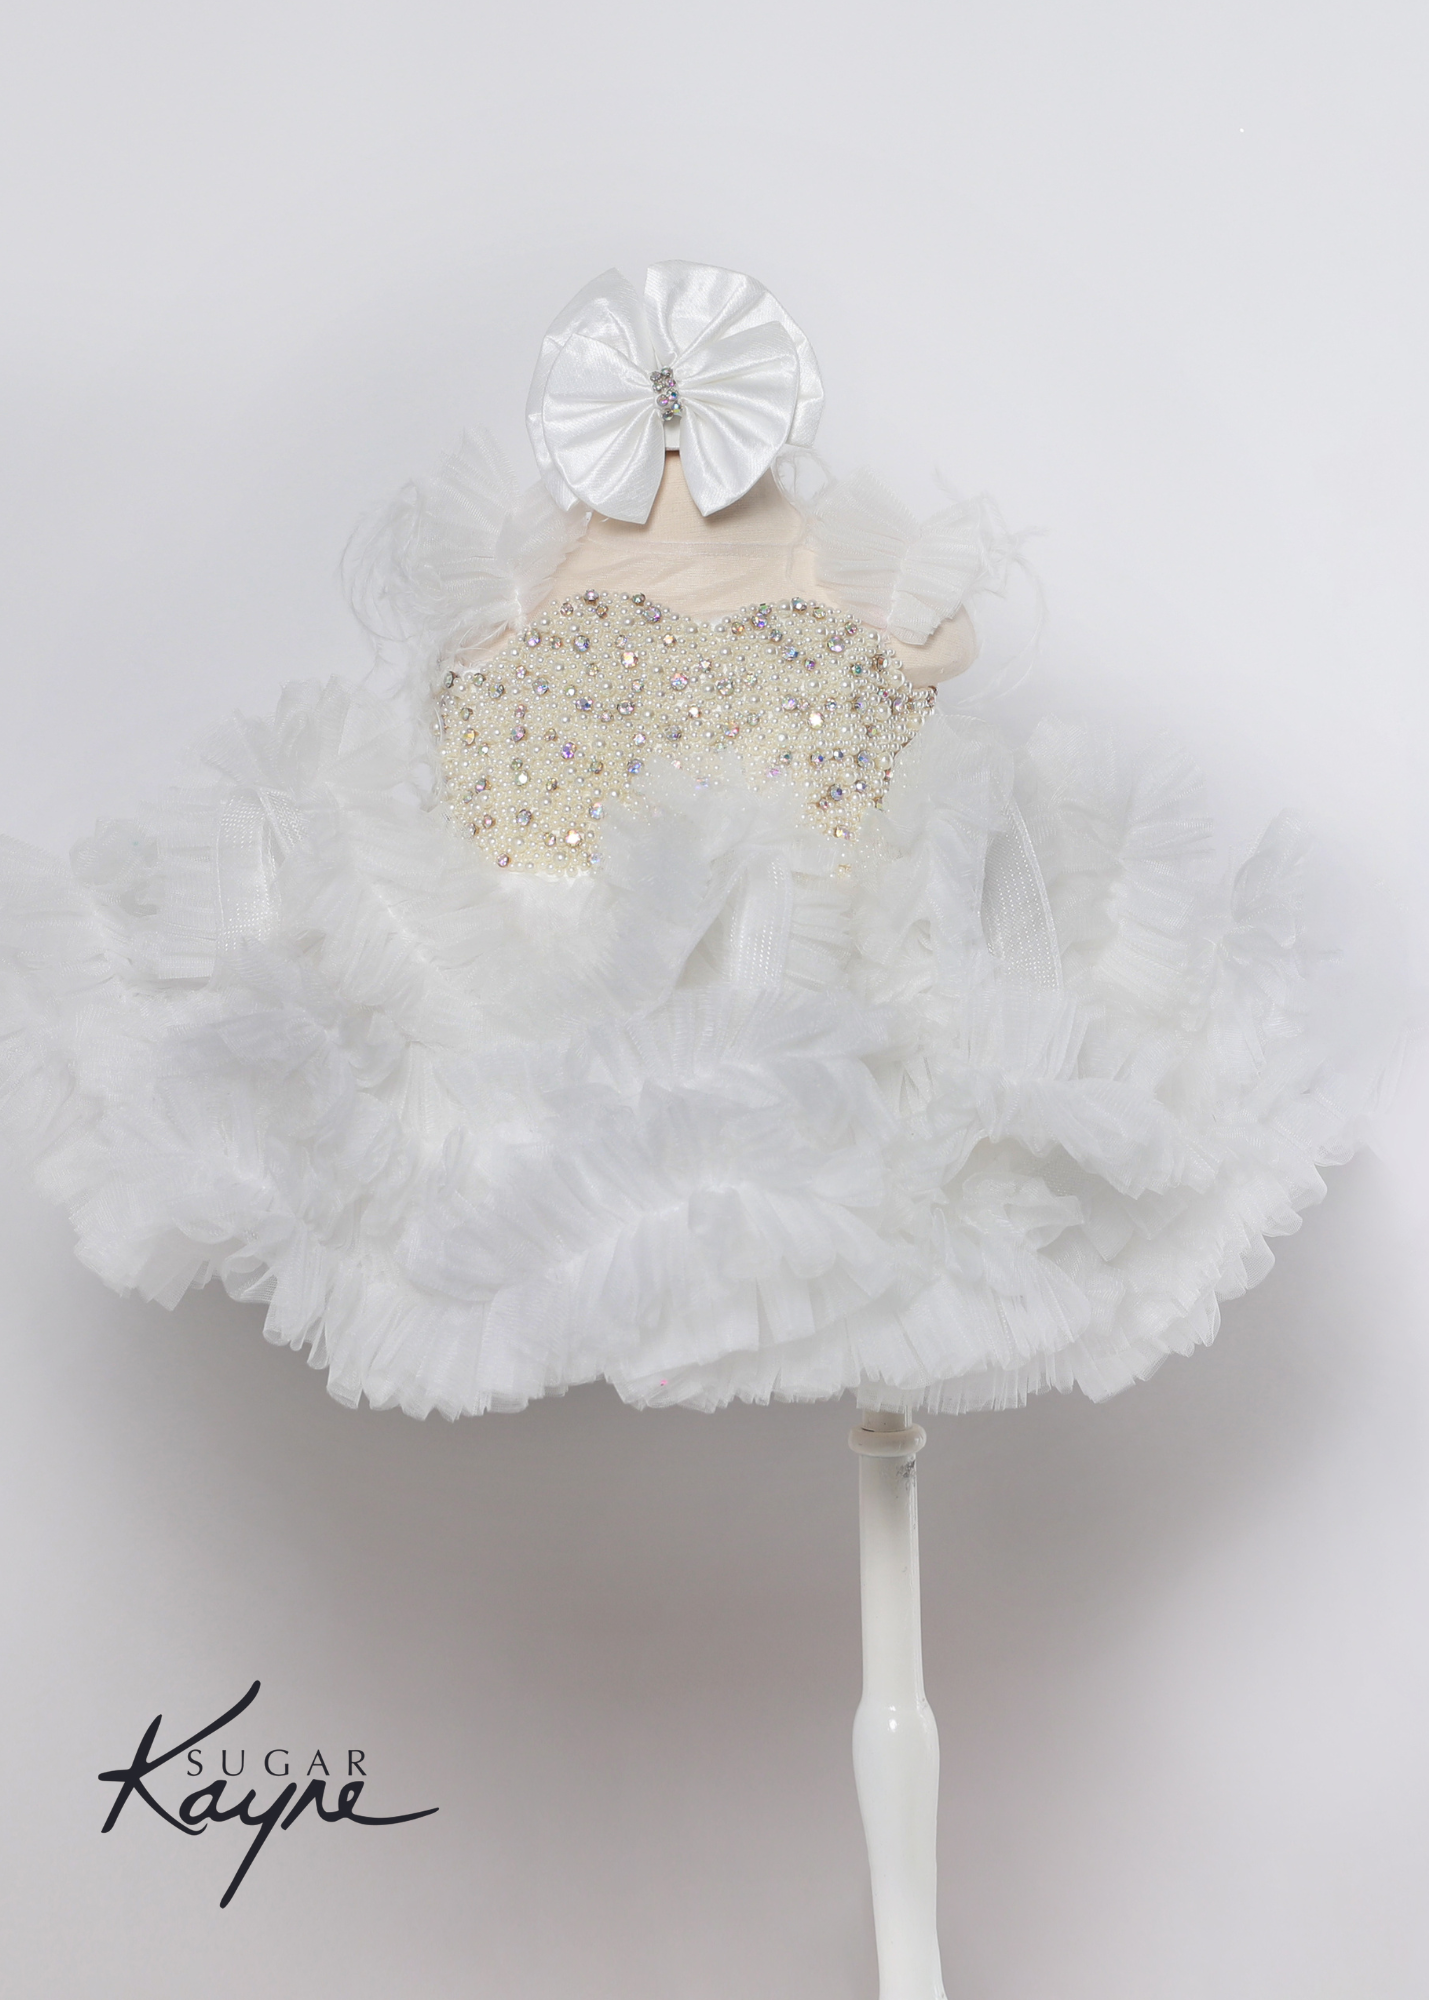 Sugar Kayne C217 Short Pleated Ruffle Cupcake Pageant Dress AB Crystal Pearl Bodice Corset. Have your little cupcake bring on all the charm in this stunning mesh gown accented with pearls. The corset back is the perfect addition as the little one grows!  Colors: White  Sizes: 0M, 12M, 18M, 24M, 2T, 3T, 4T, 5T, 6M, 6T  Fabric Mesh, Satin Lining